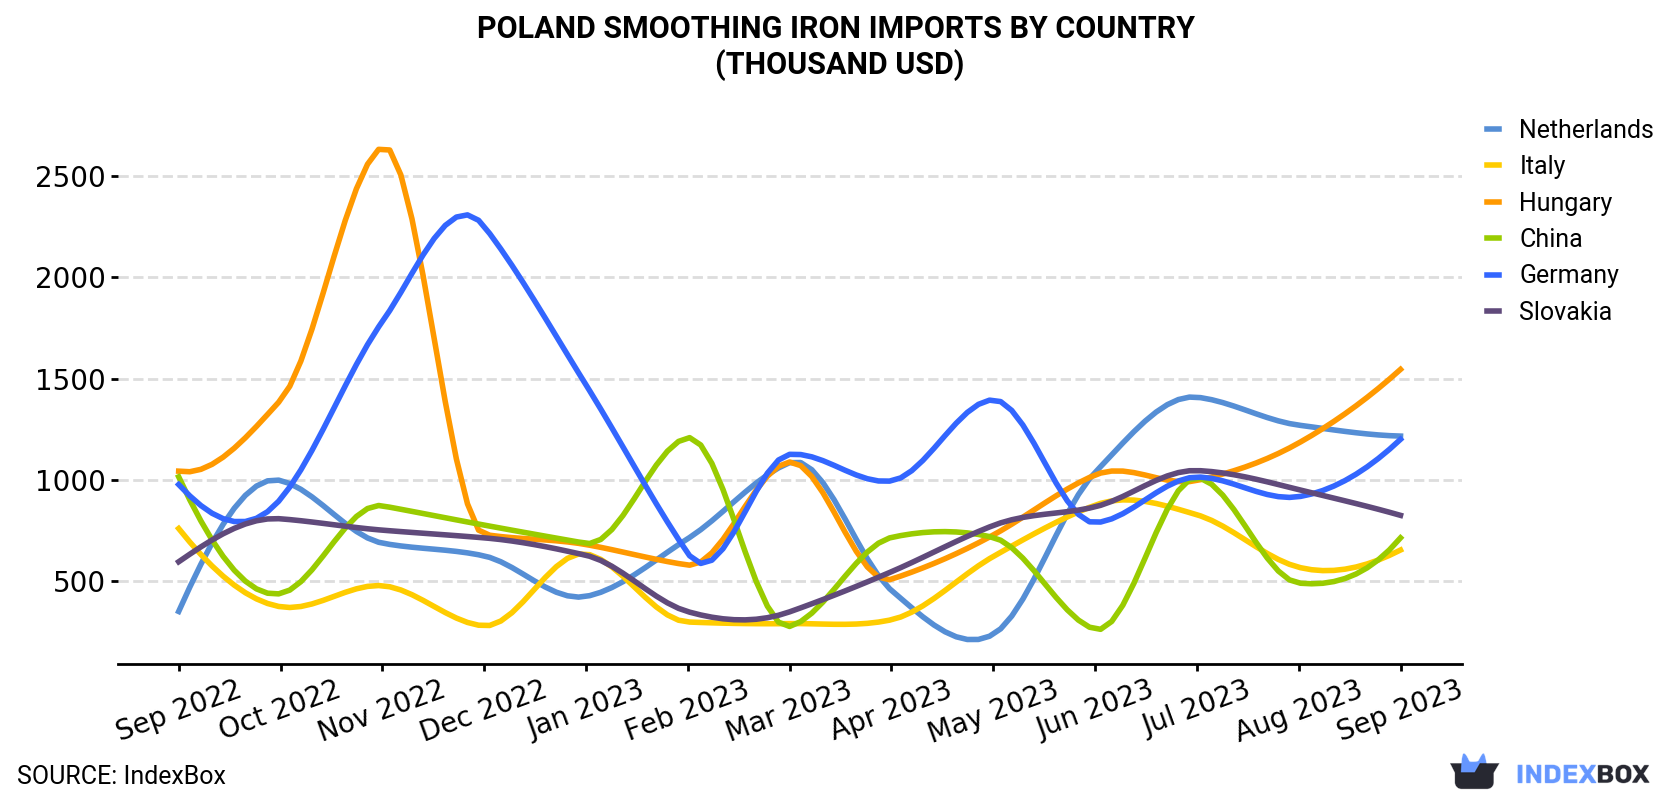 Poland Smoothing Iron Imports By Country (Thousand USD)